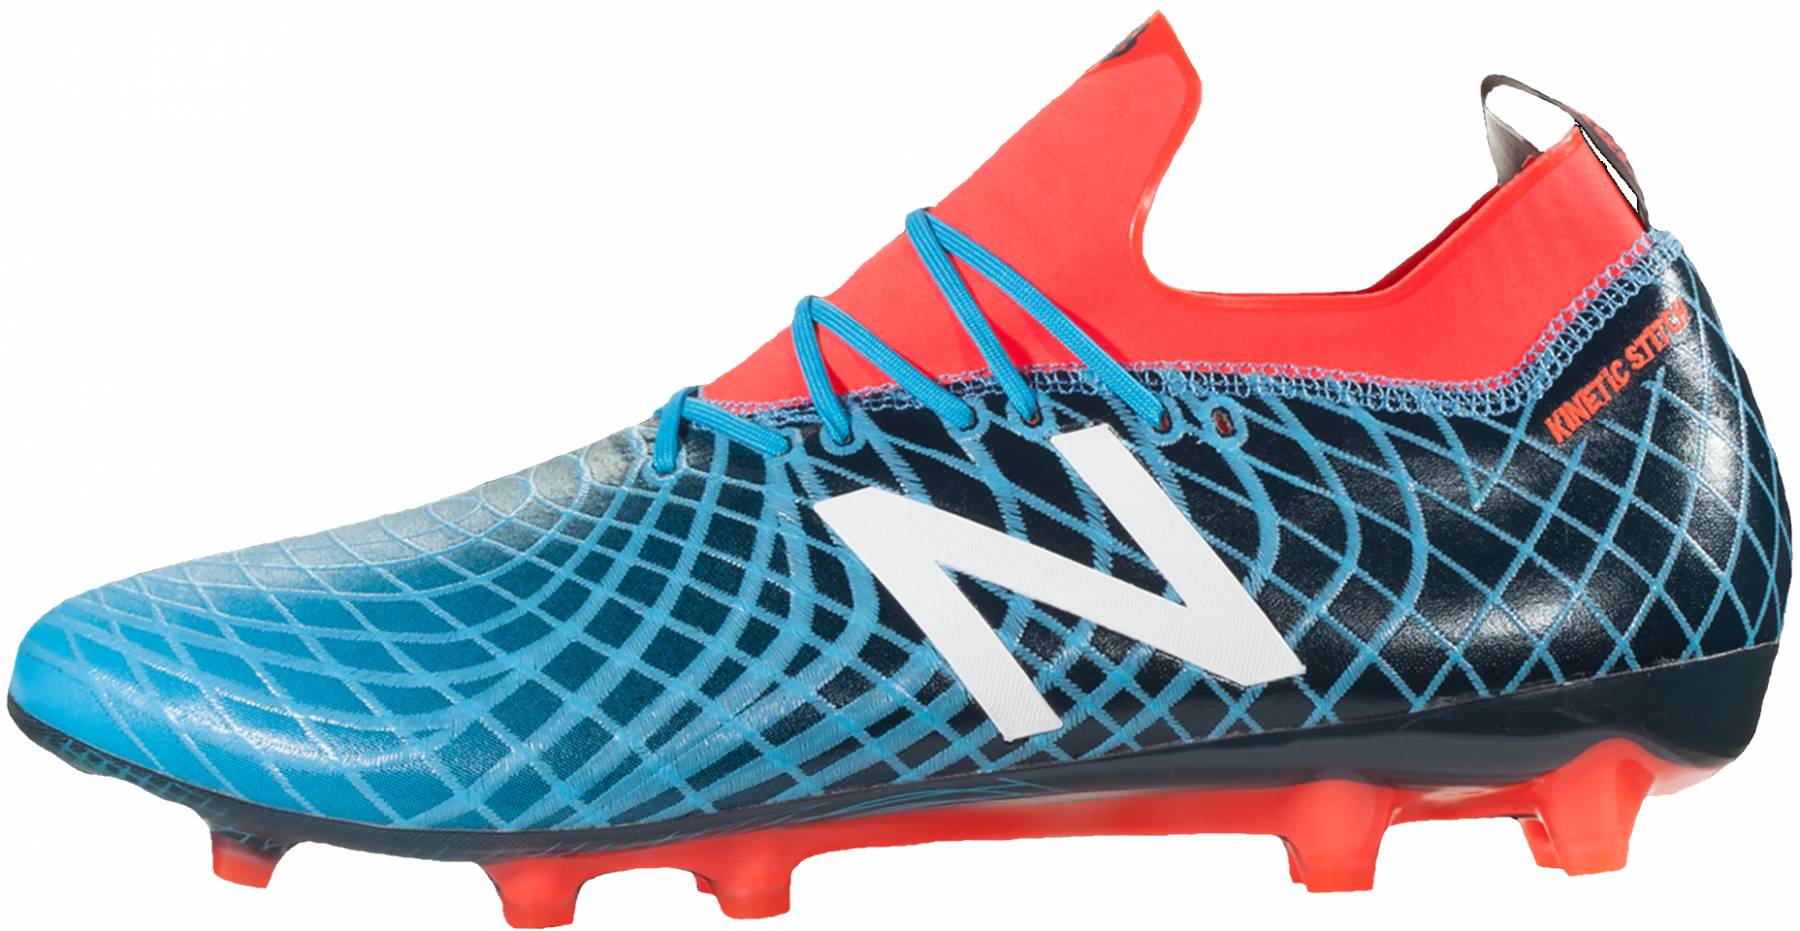 8 New Balance soccer cleats: Save up to 51% | RunRepeat